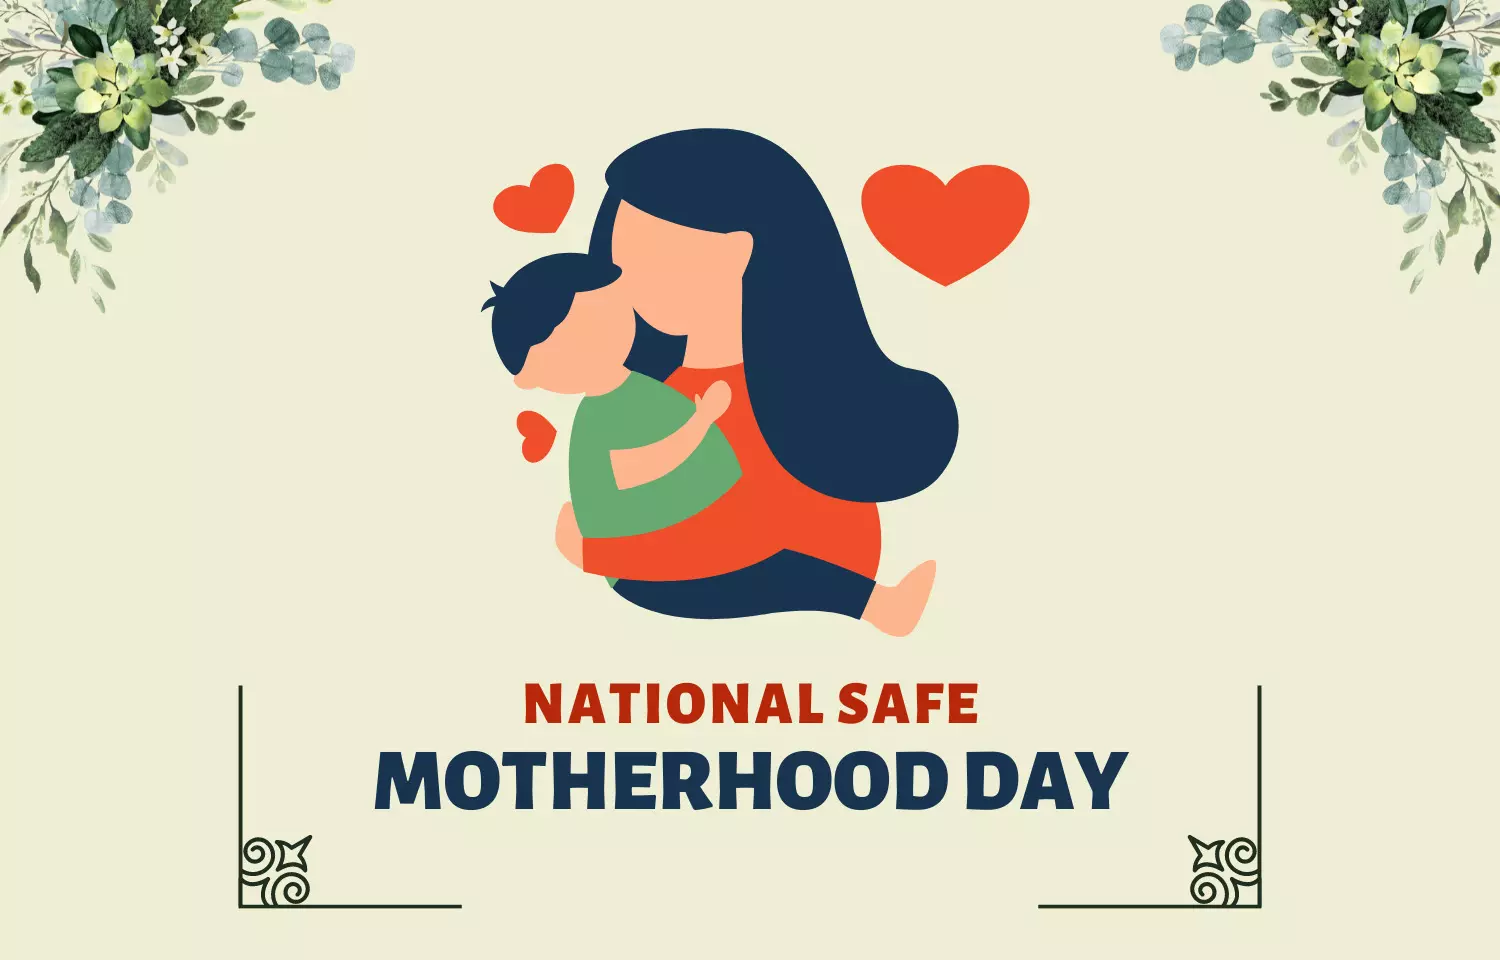 Significance of National Safe Motherhood Day